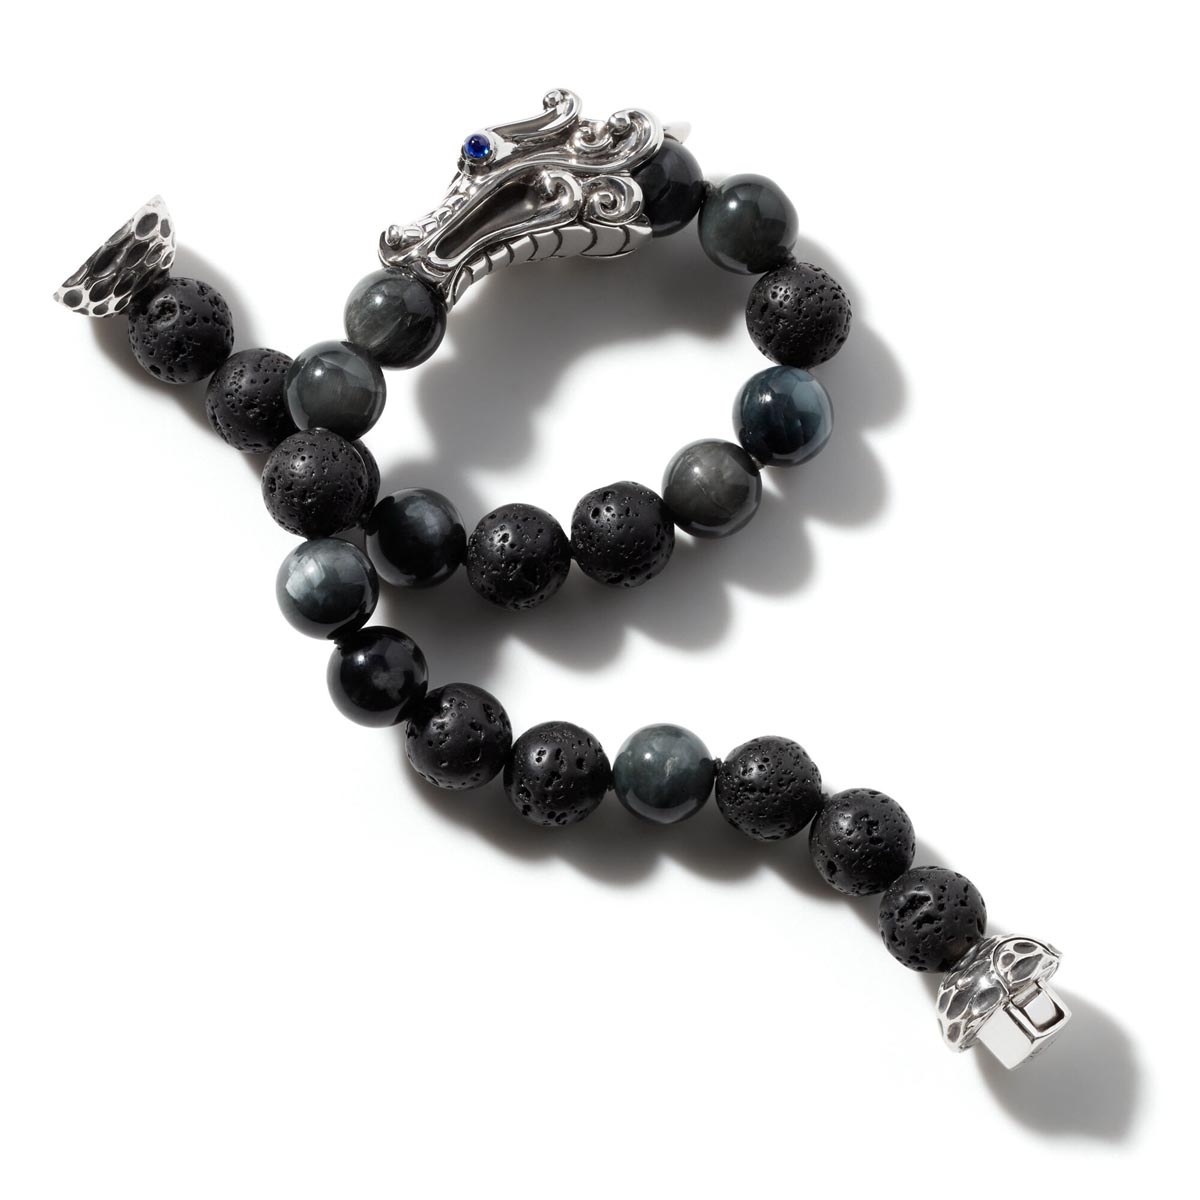 John Hardy Legends Naga Mens Obsidian Lava Rock and Eagle Eye Bead Bracelet in Sterling Silver with Sapphires